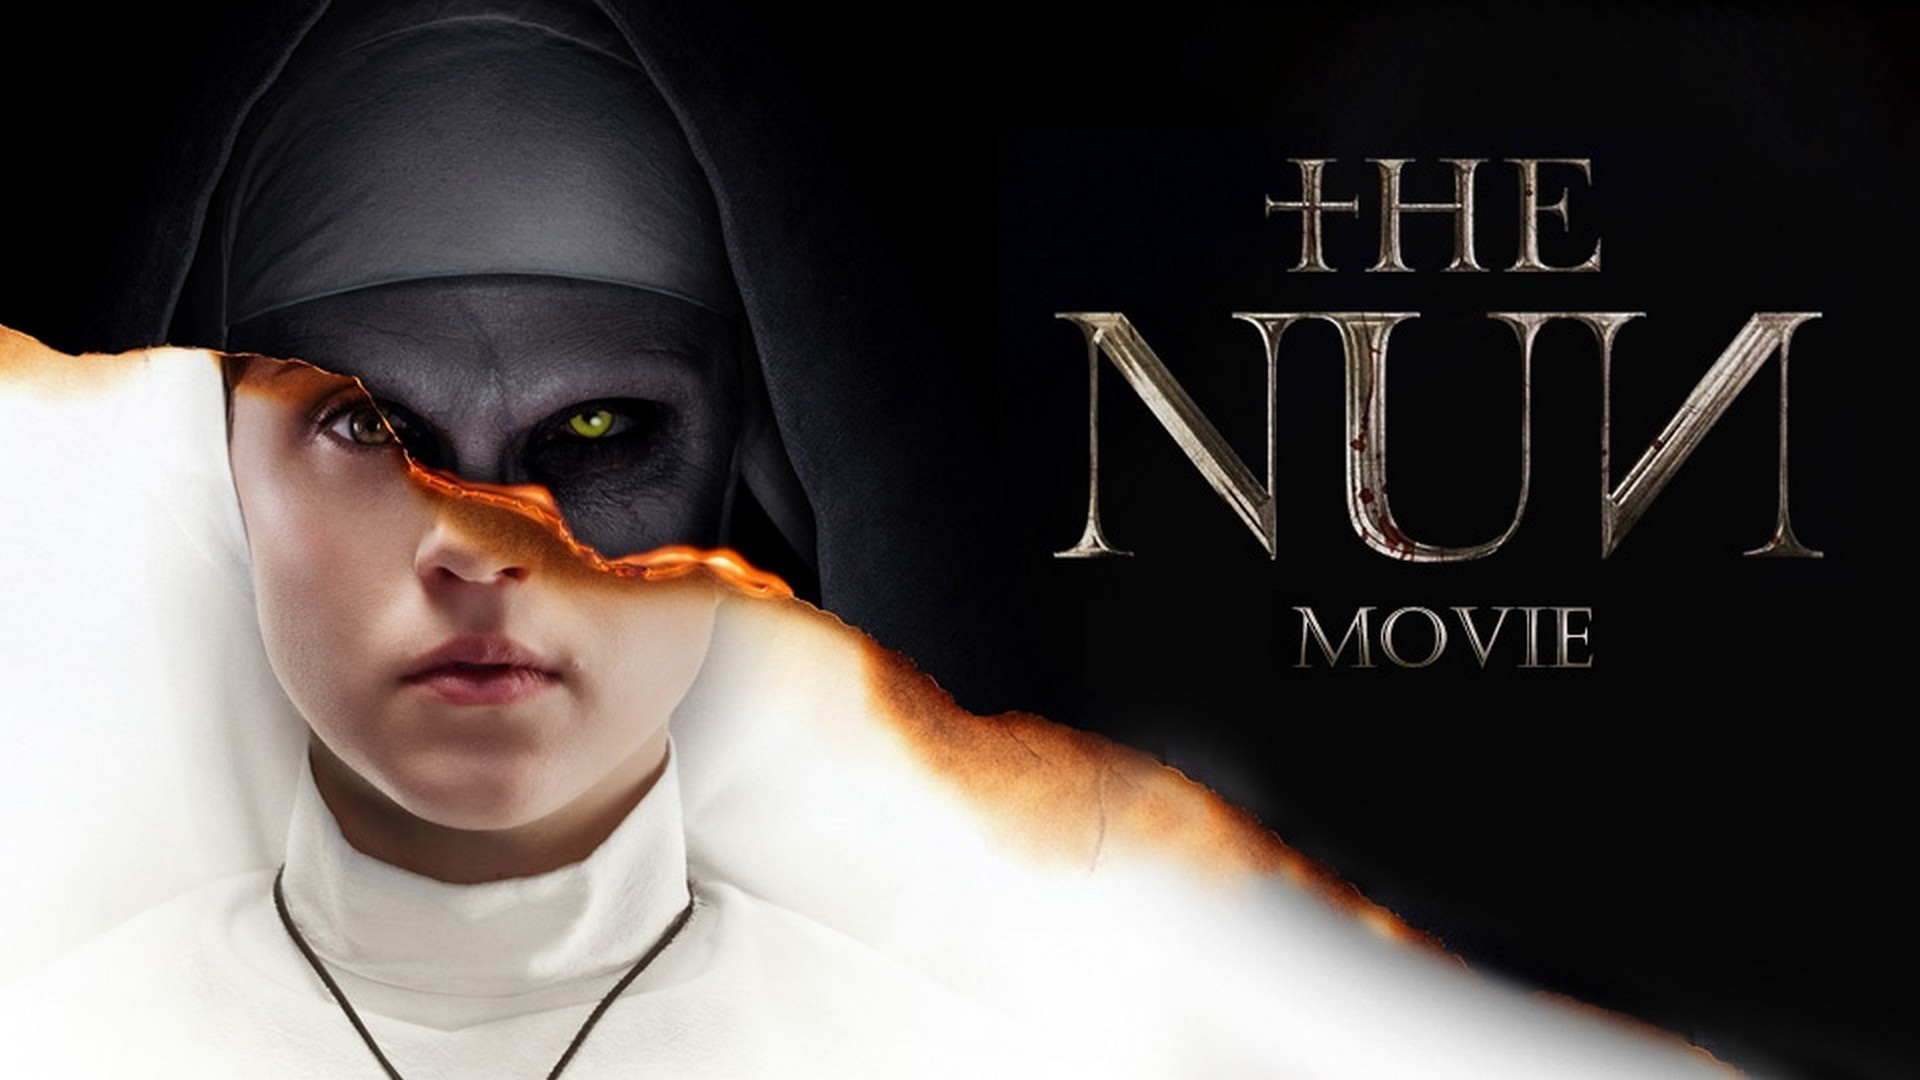 The Nun Movie Wallpaper with image resolution 1920x1080 pixel. You can use this wallpaper as background for your desktop Computer Screensavers, Android or iPhone smartphones